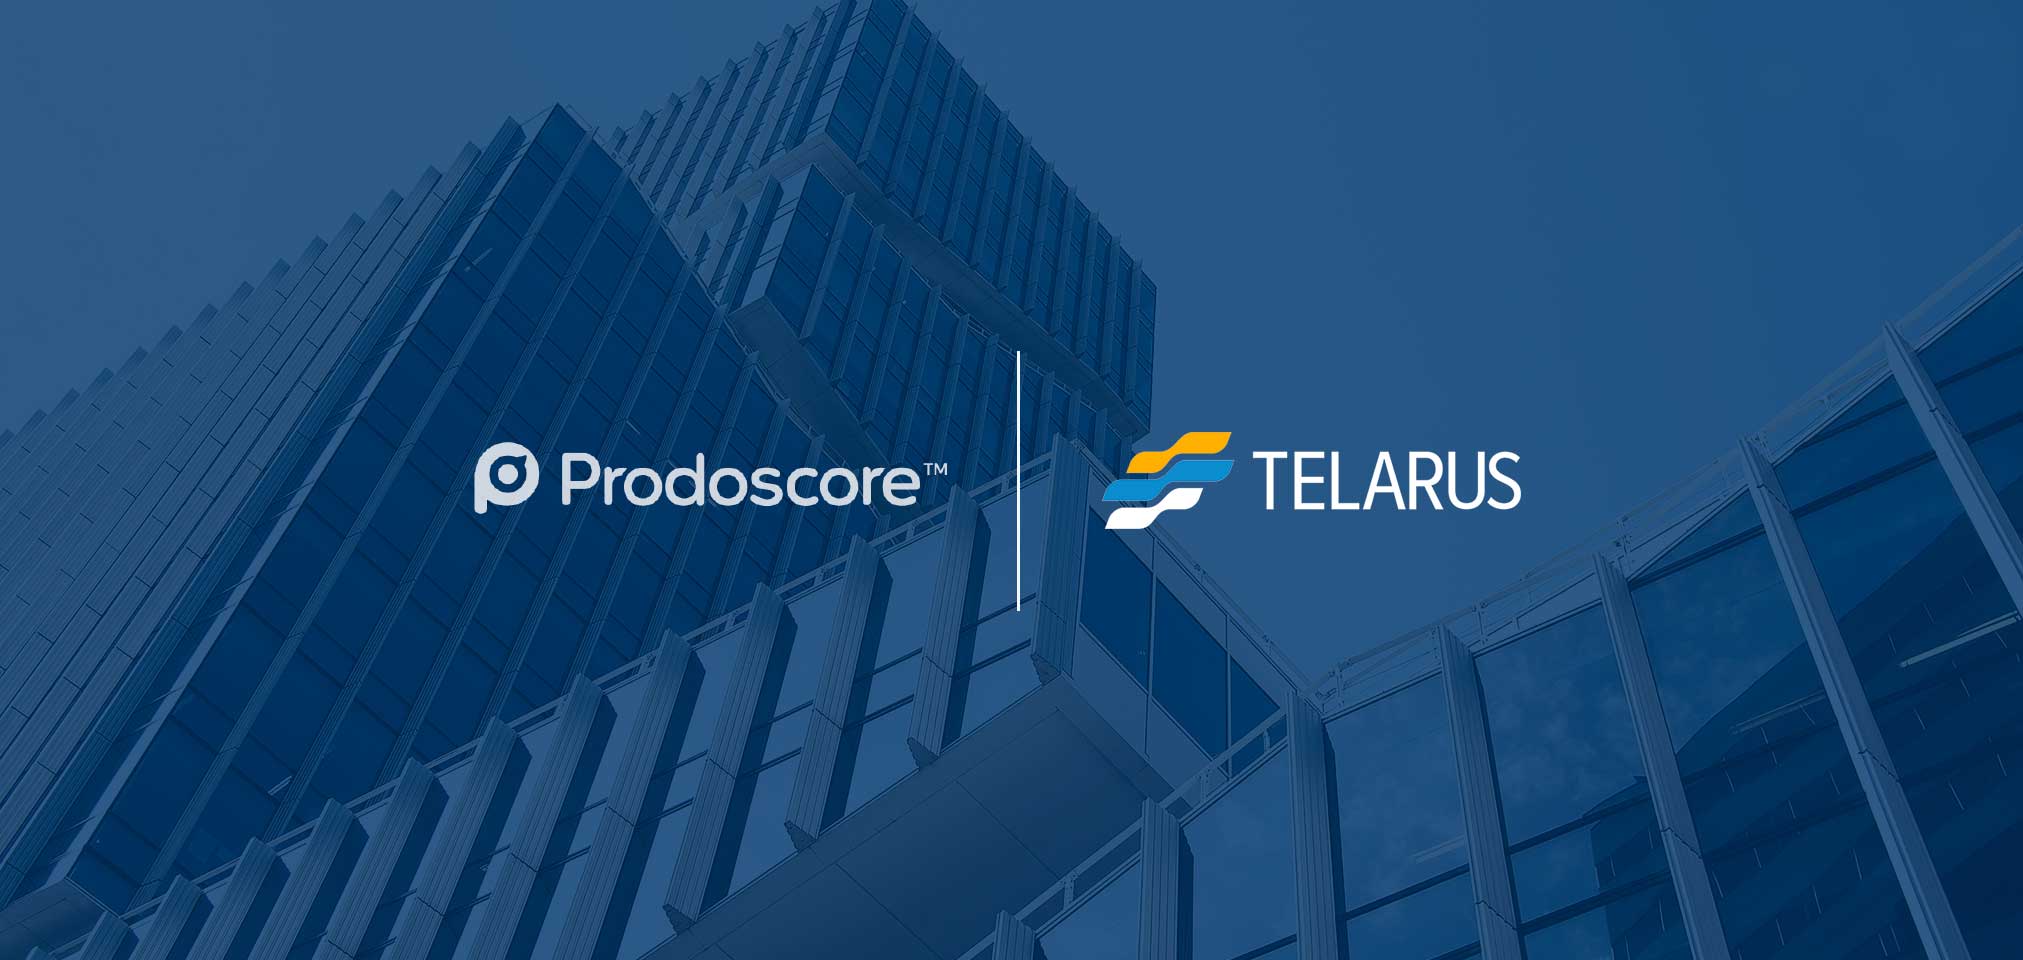 Prodoscore and Telarus Announce Partnership to Provide Key Business Solutions